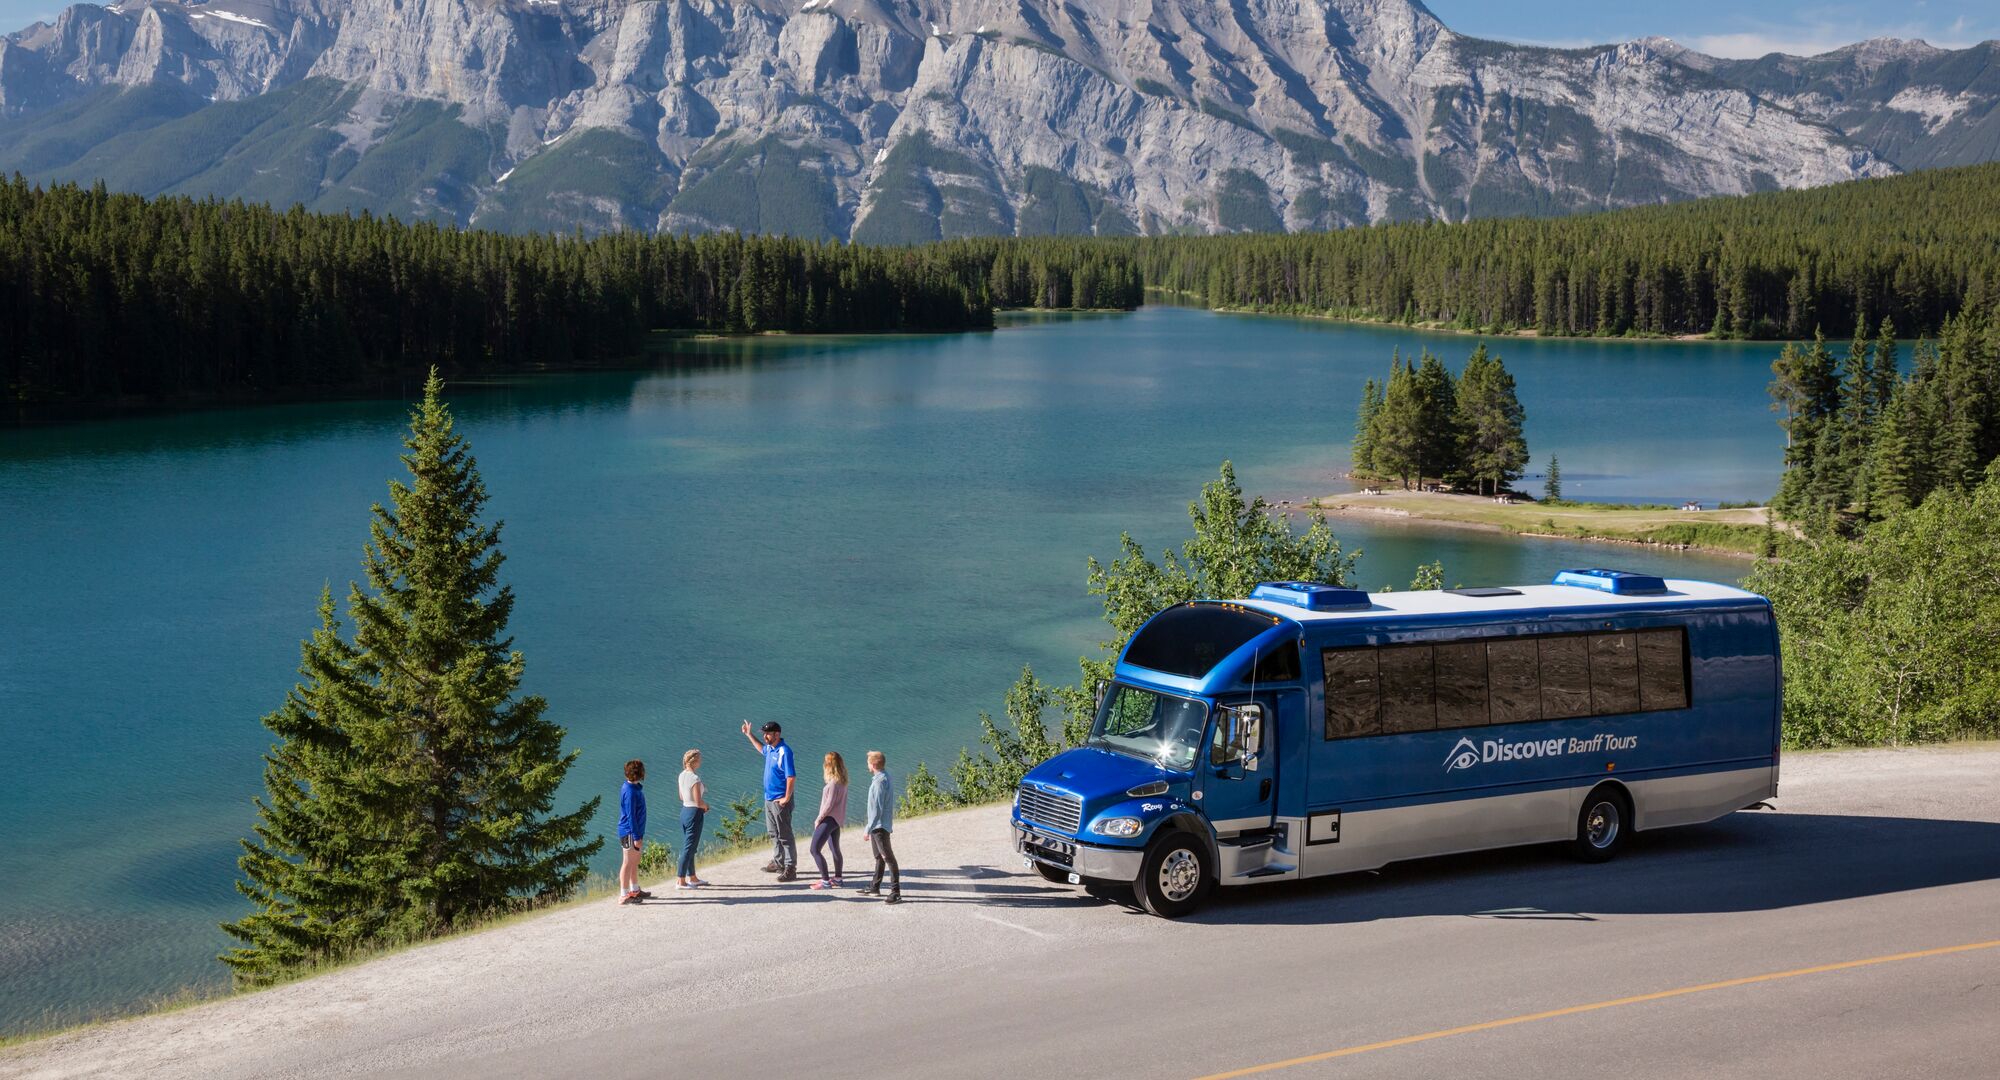 A tour group stop to admire a turquoise lake with Mount Rundle in the background. A Discover Banff Tours bus is parked nearby